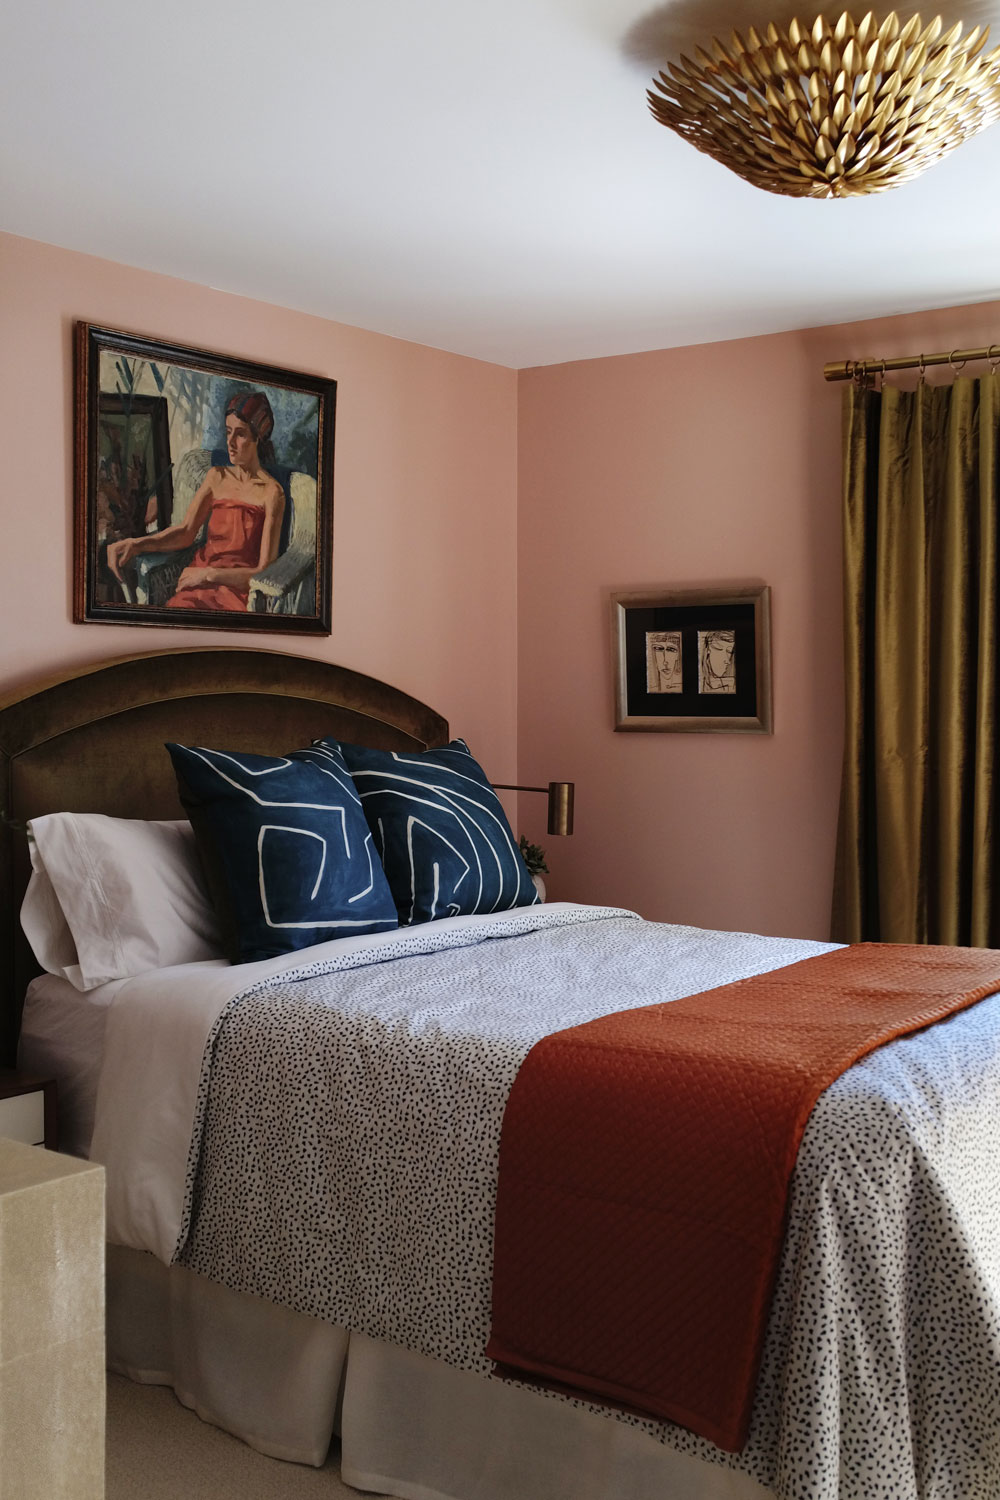 Bedroom lighting ideas. Find new bedroom light fixtures. Rounding up ceiling lights, table lamps, and floor lamps for a new guest bedroom makeover.